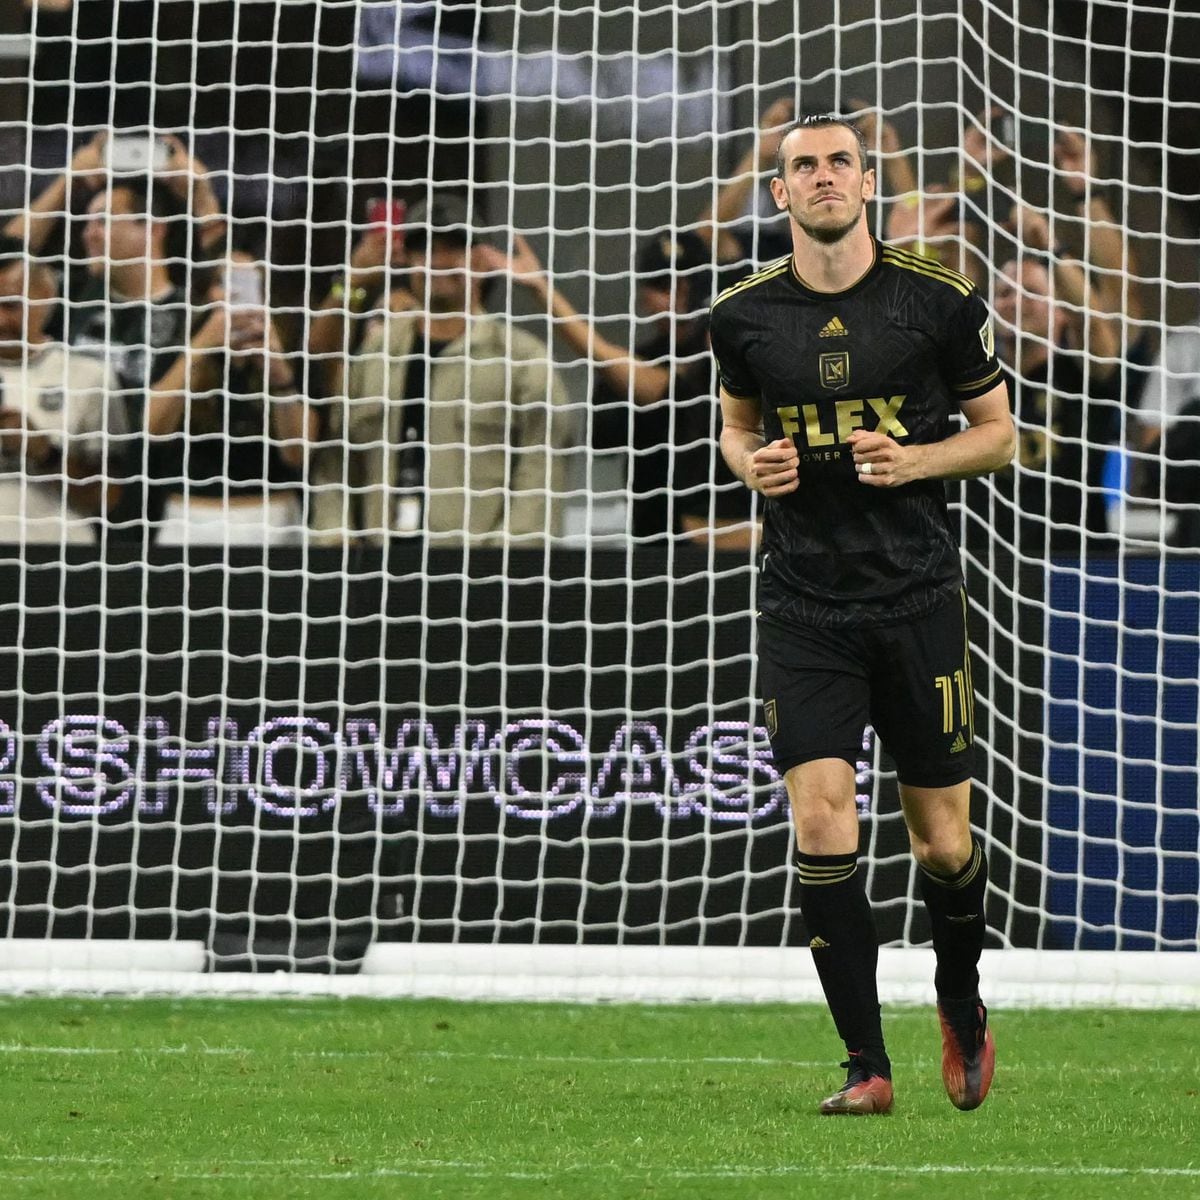 Gareth Bale to LAFC: What is Expected From Him in the MLS? - Back Sports  Page